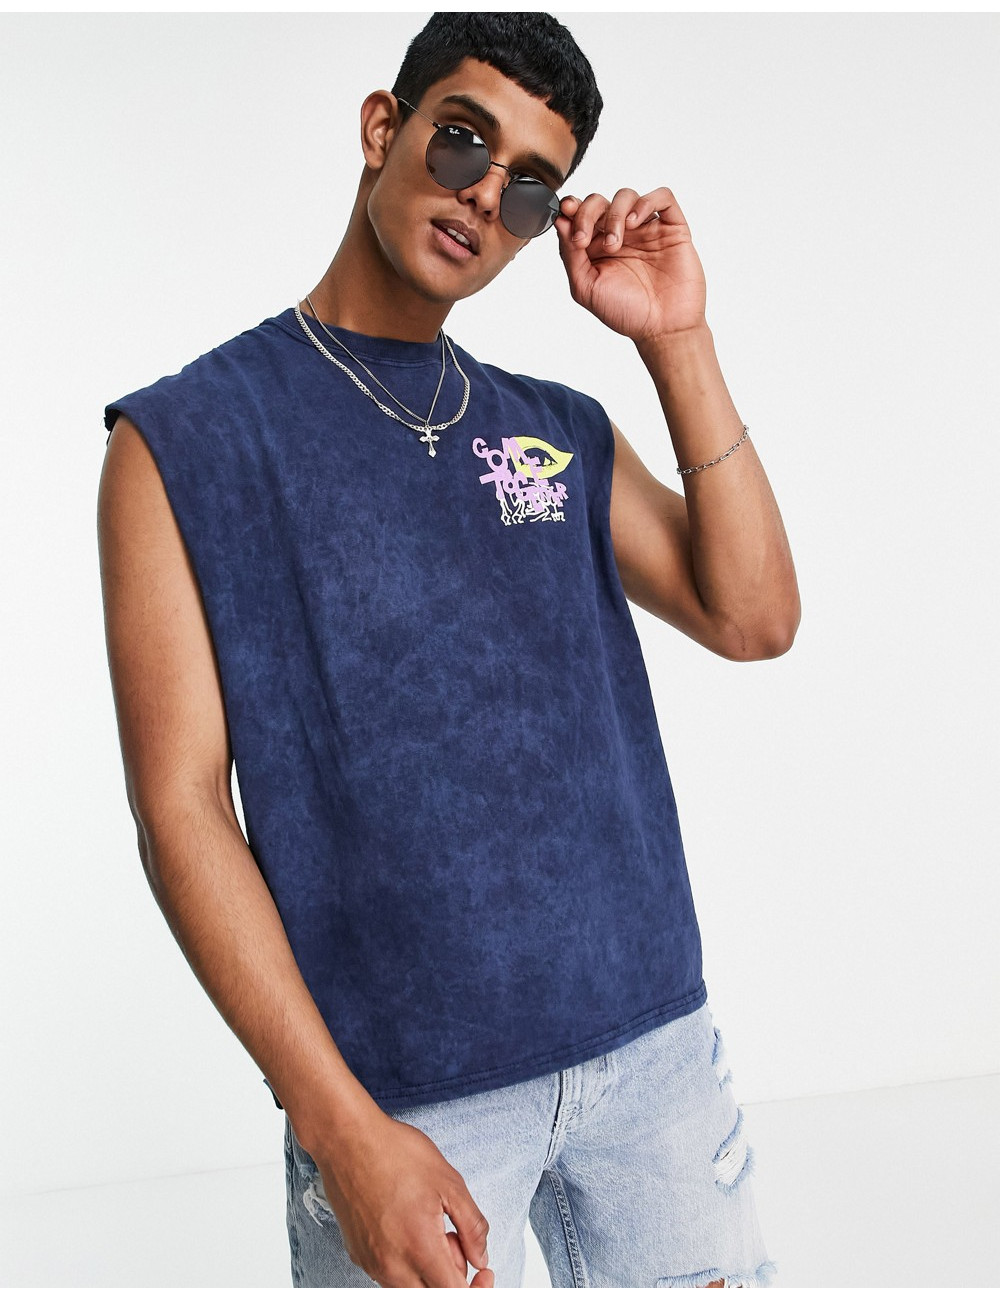 Topman tank with come...